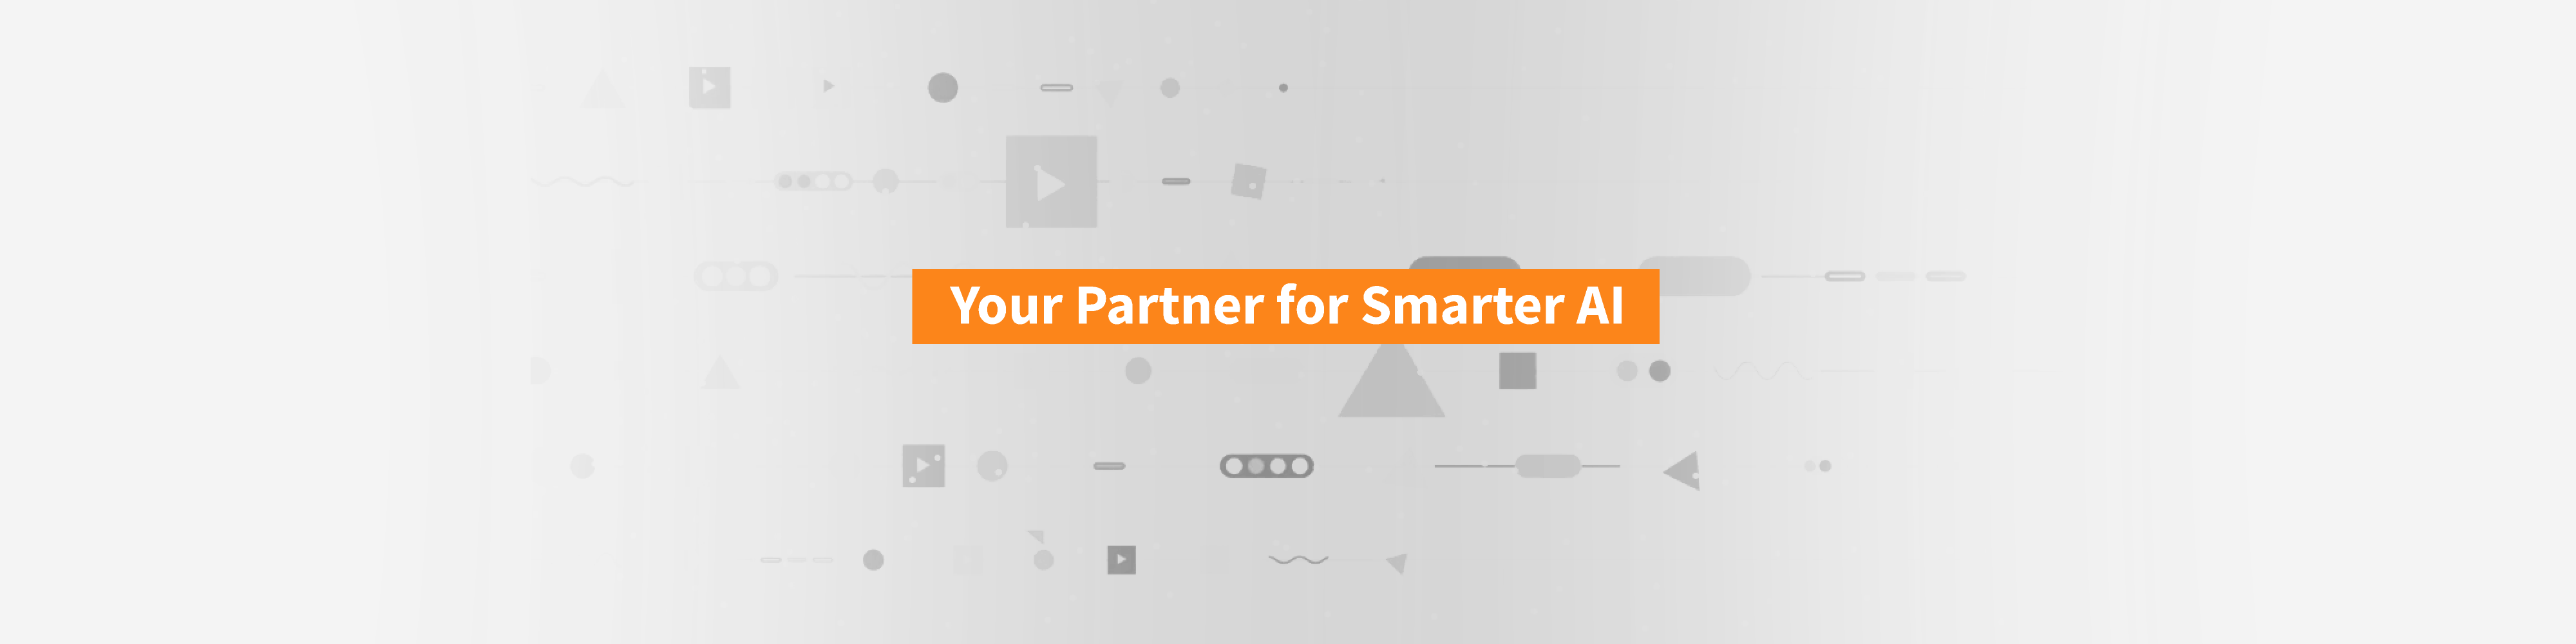 Your Partner for Smarter AI